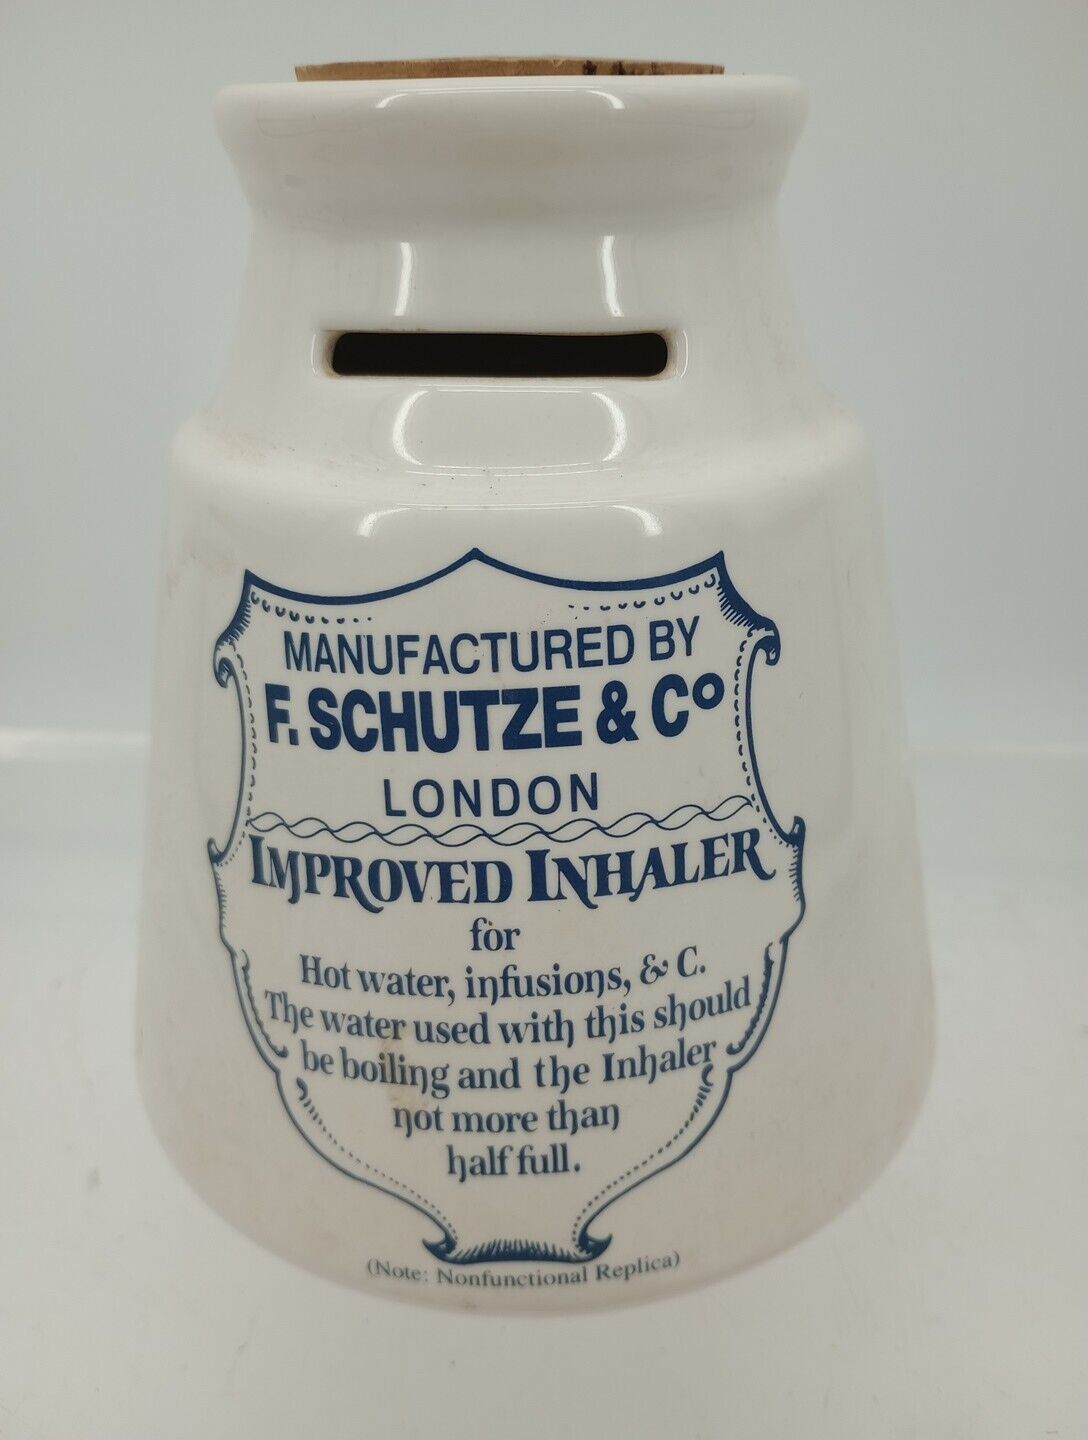  Vtg Bank A REPLICA Of F. Schutze & Co. London Improved Inhaler With Story Inclu